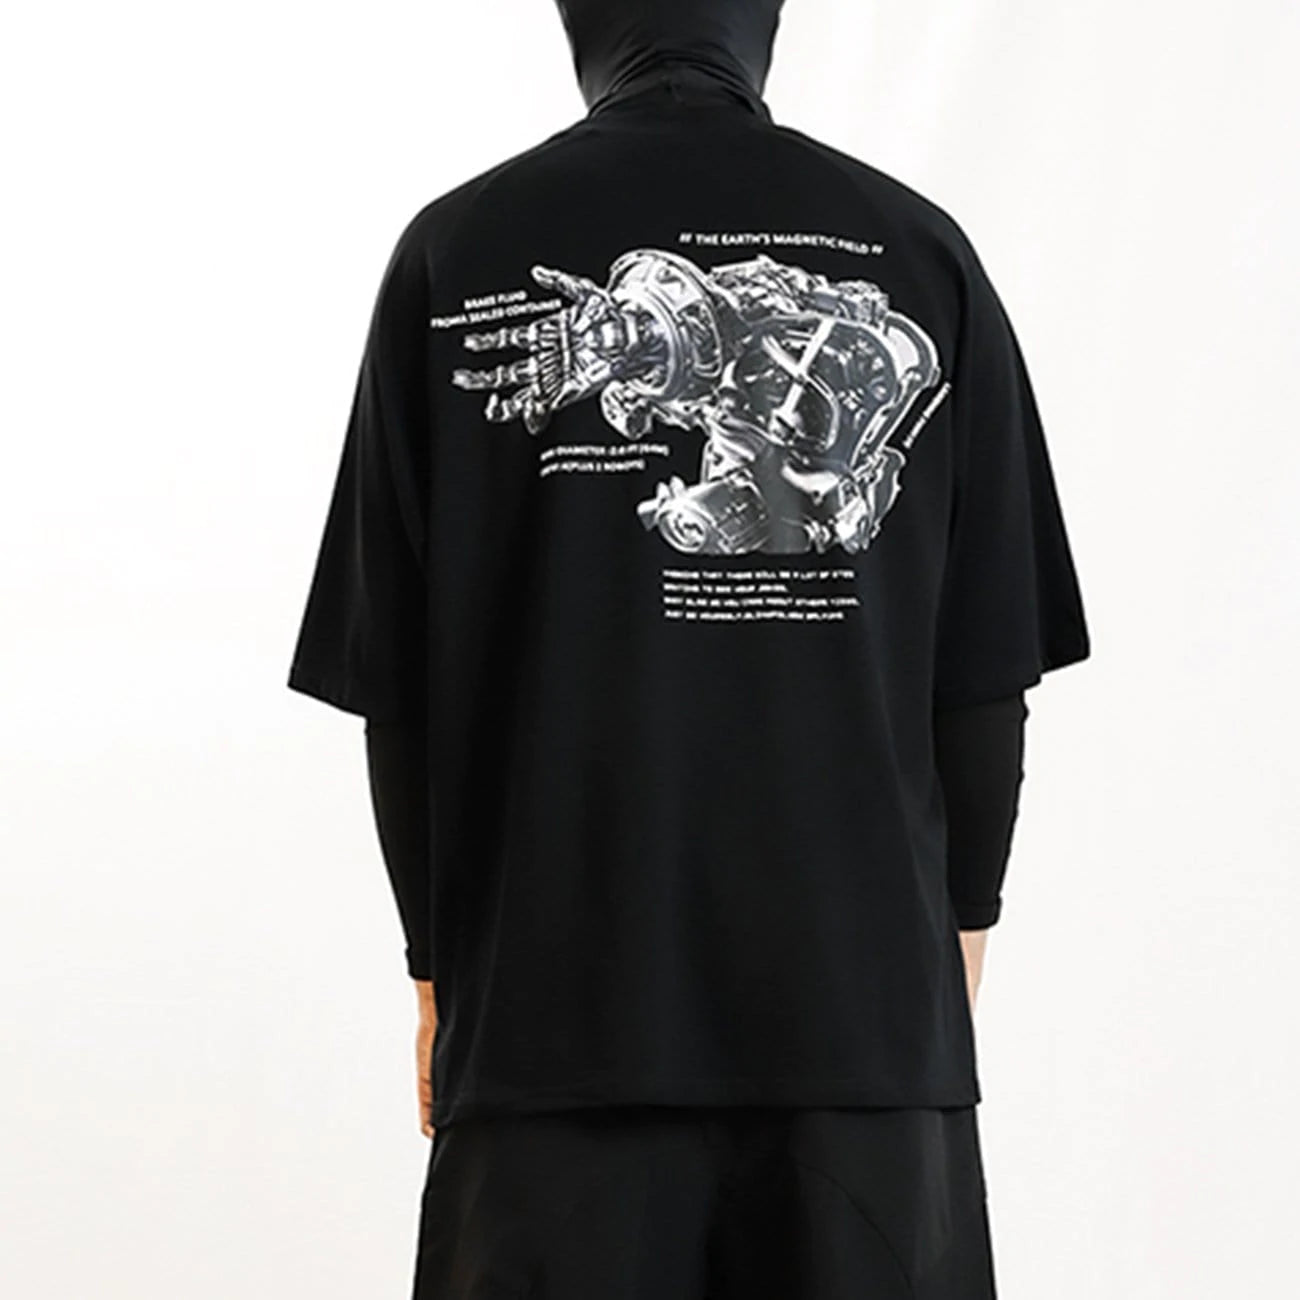 WLS Three-dimensional Armed Mech Graphic Tee